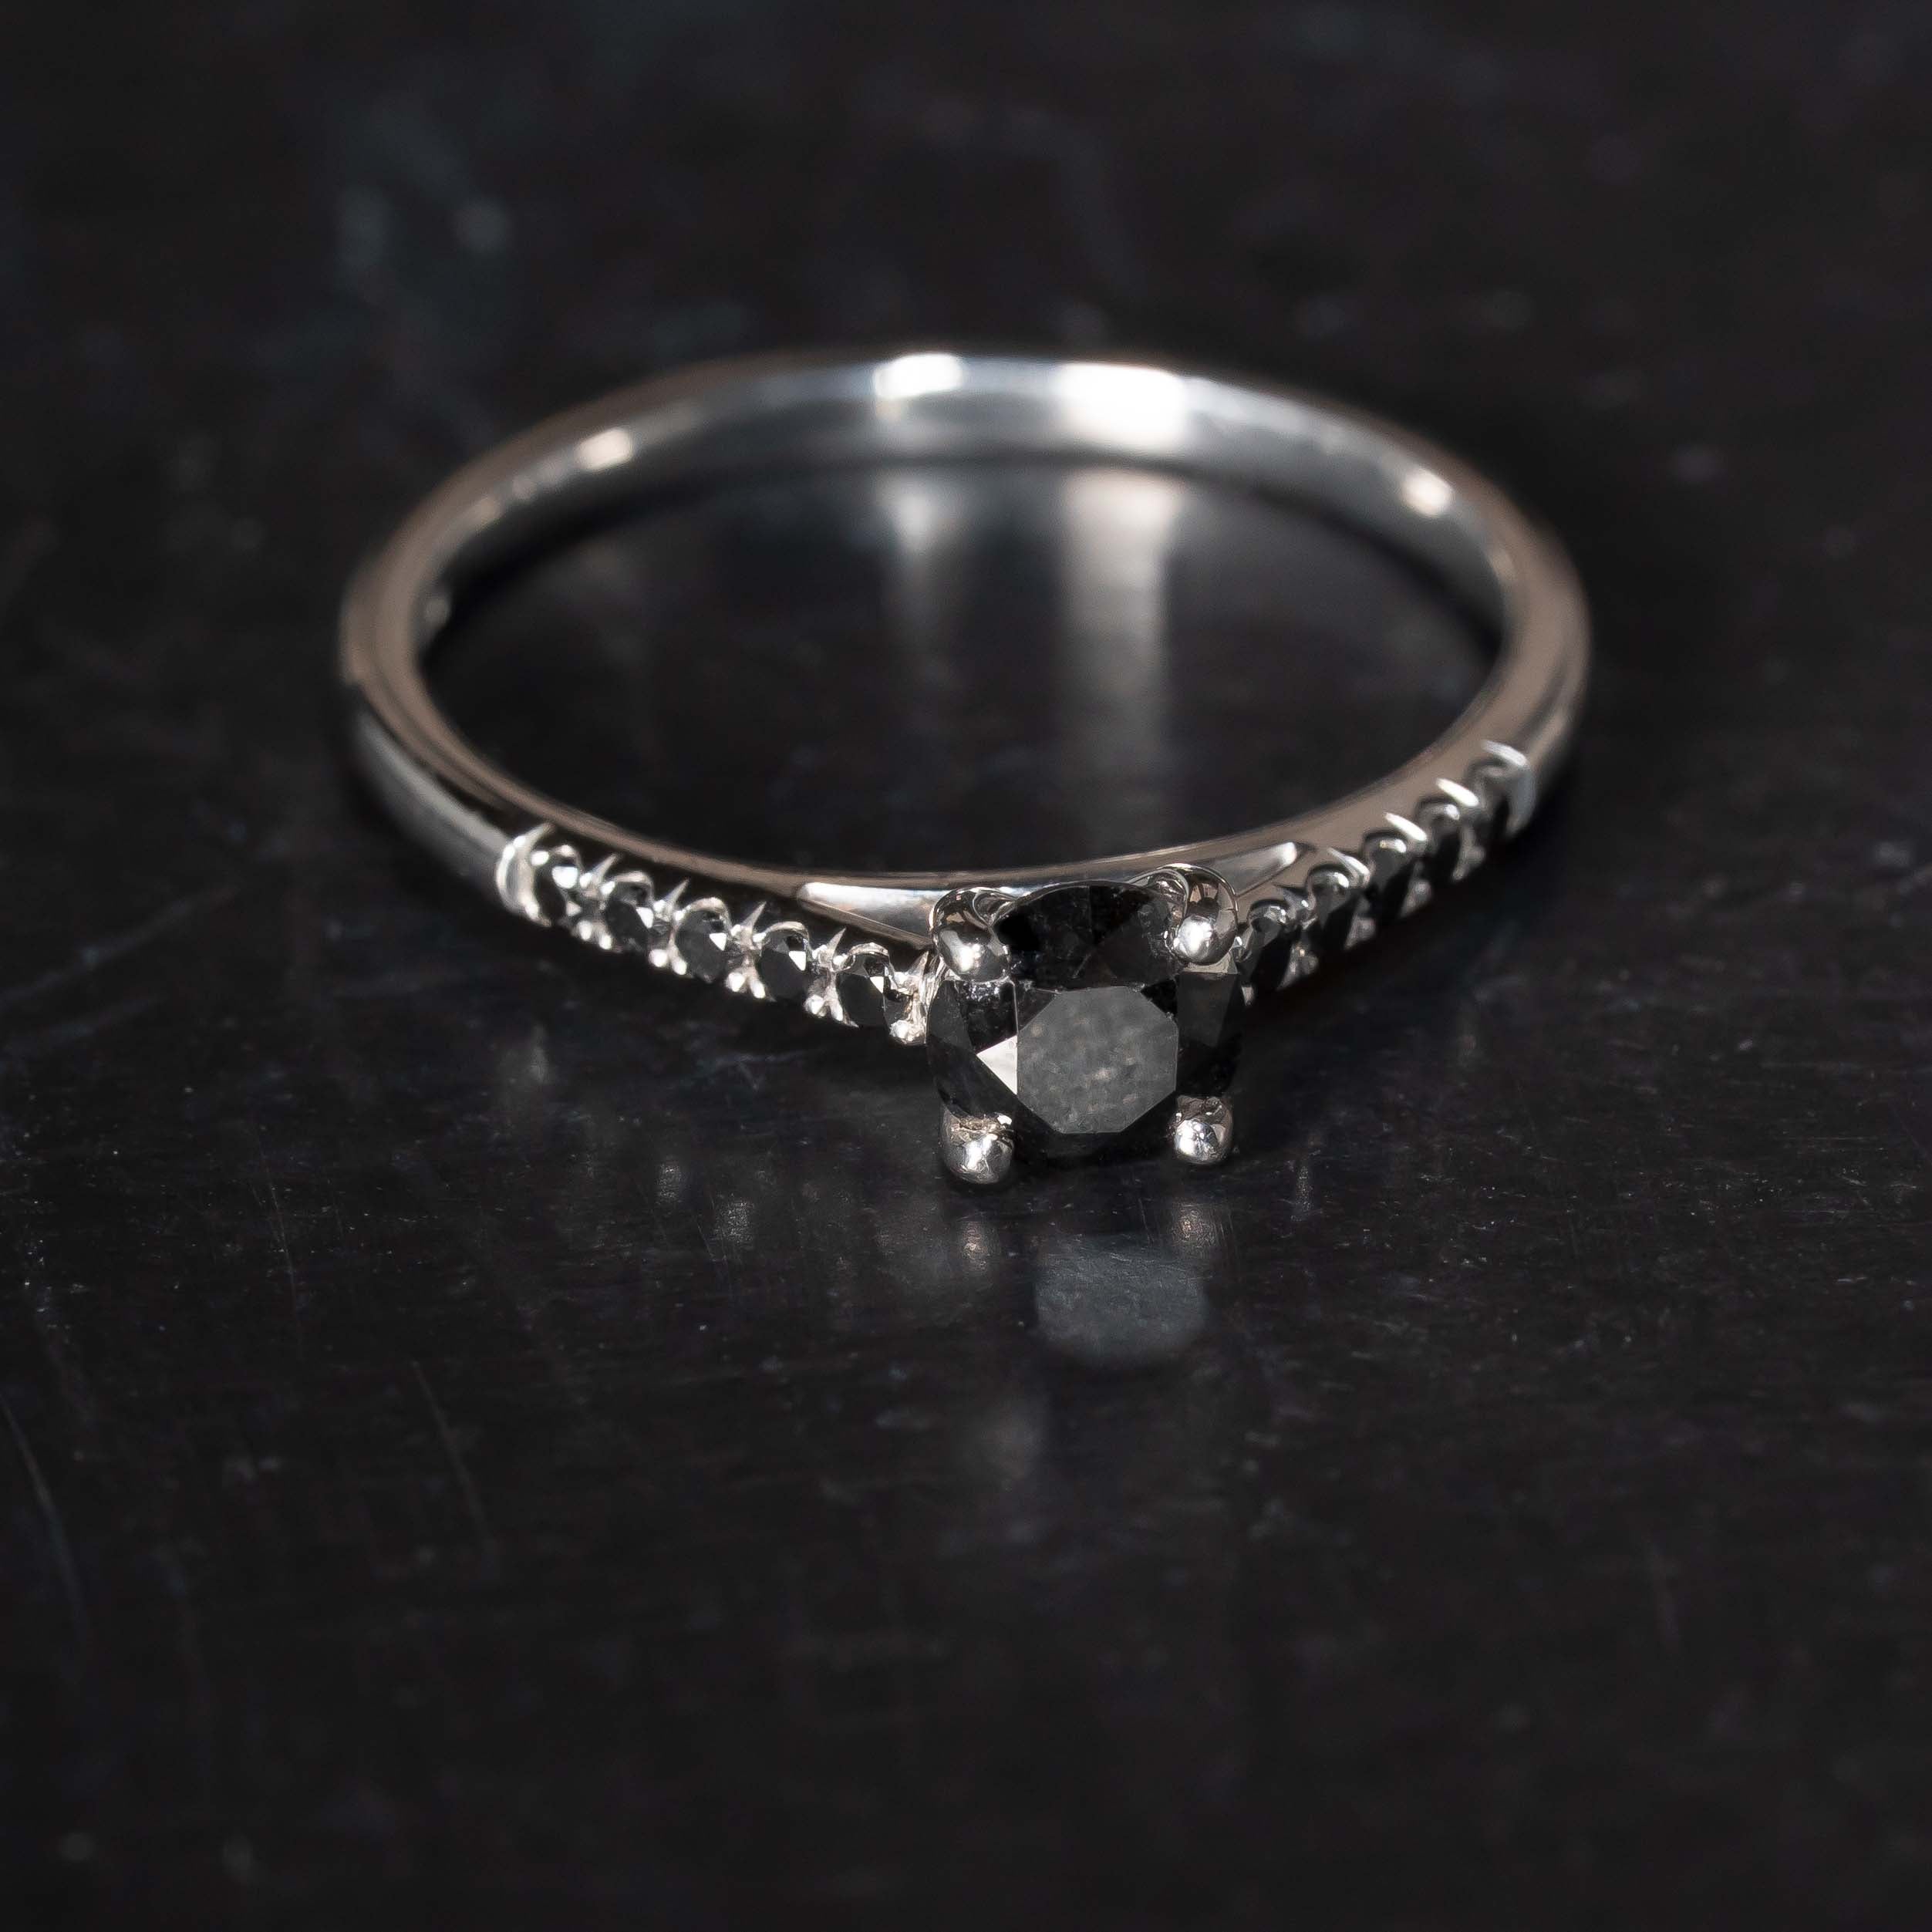 Gothic style ring with black diamonds